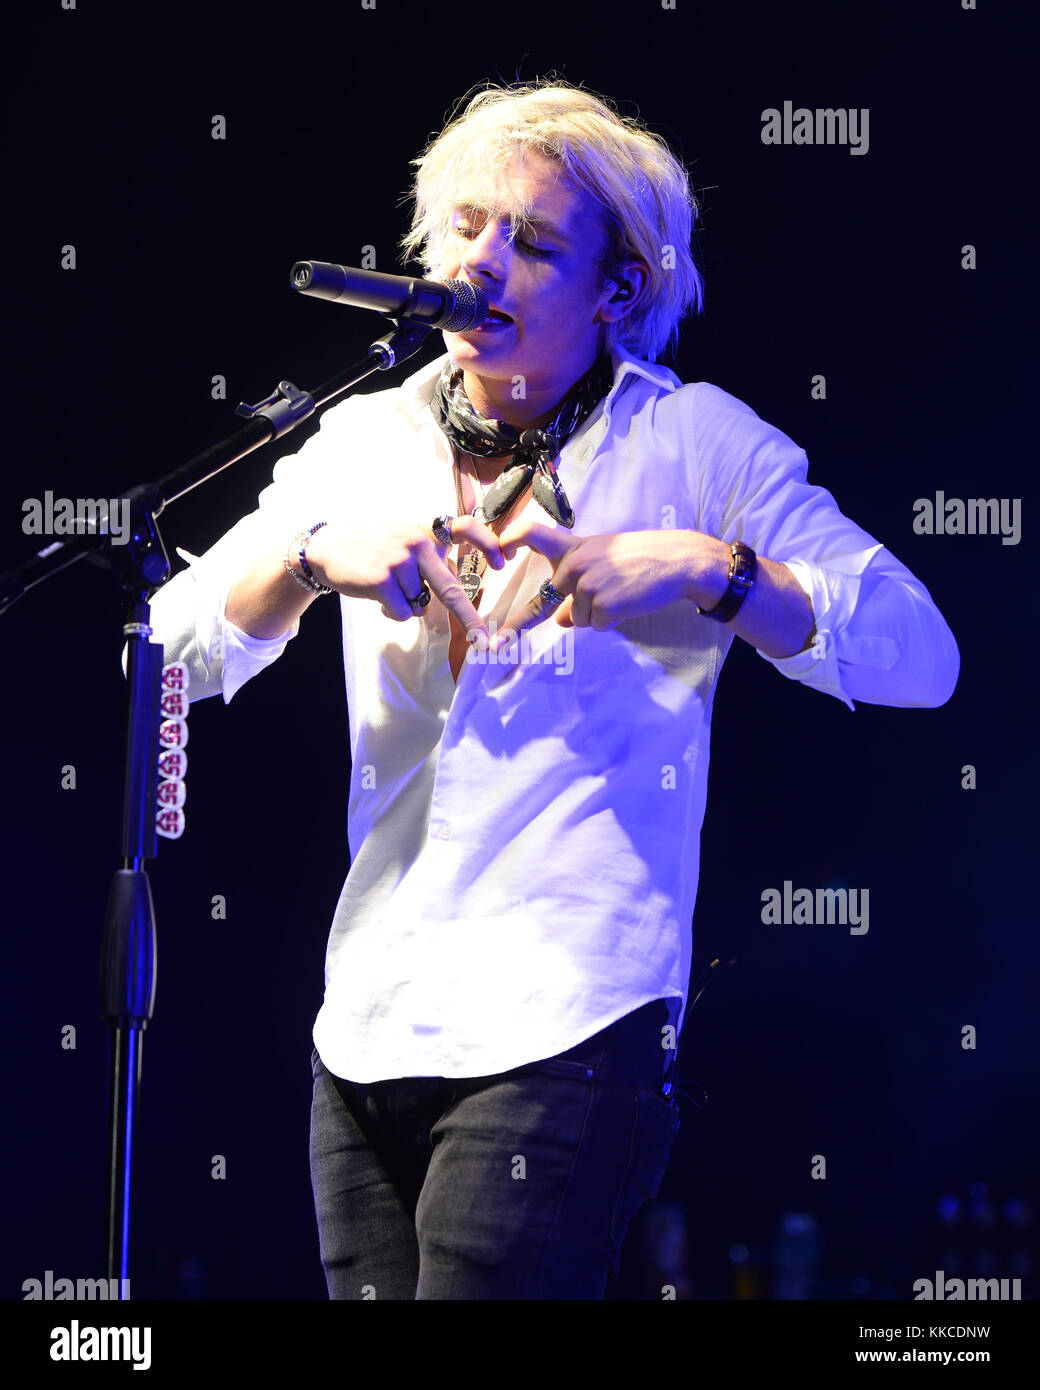 BOCA RATON - JULY 8:  Ross Lynch of R5 performs at the Mizner Park Amphitheatre on July 8, 2015 in Boca Raton, Florida  People:  Ross Lynch Stock Photo